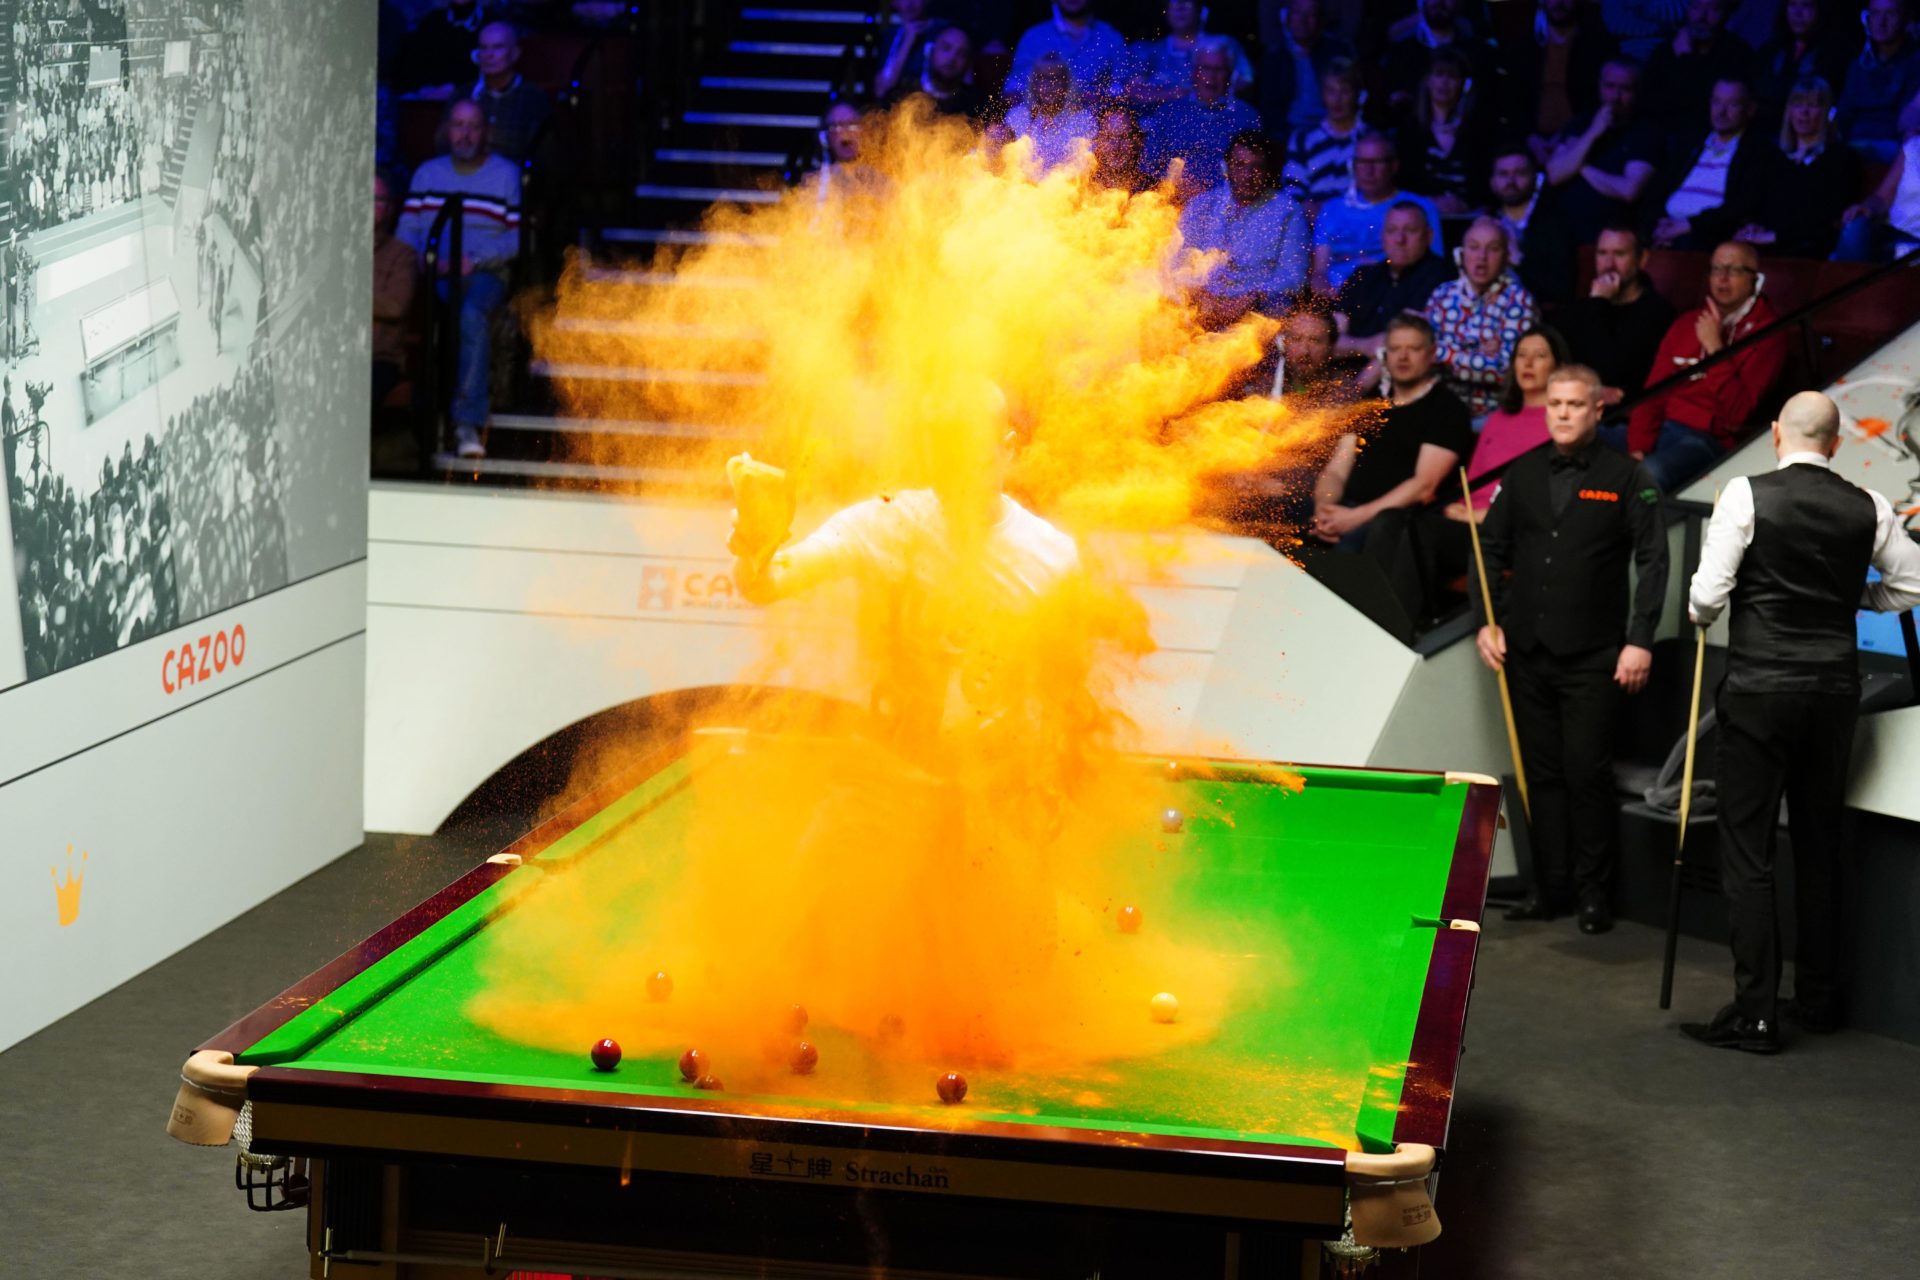 A Just Stop Oil protester jumps on the table and throws orange powder during the World Snooker Championship in Sheffield